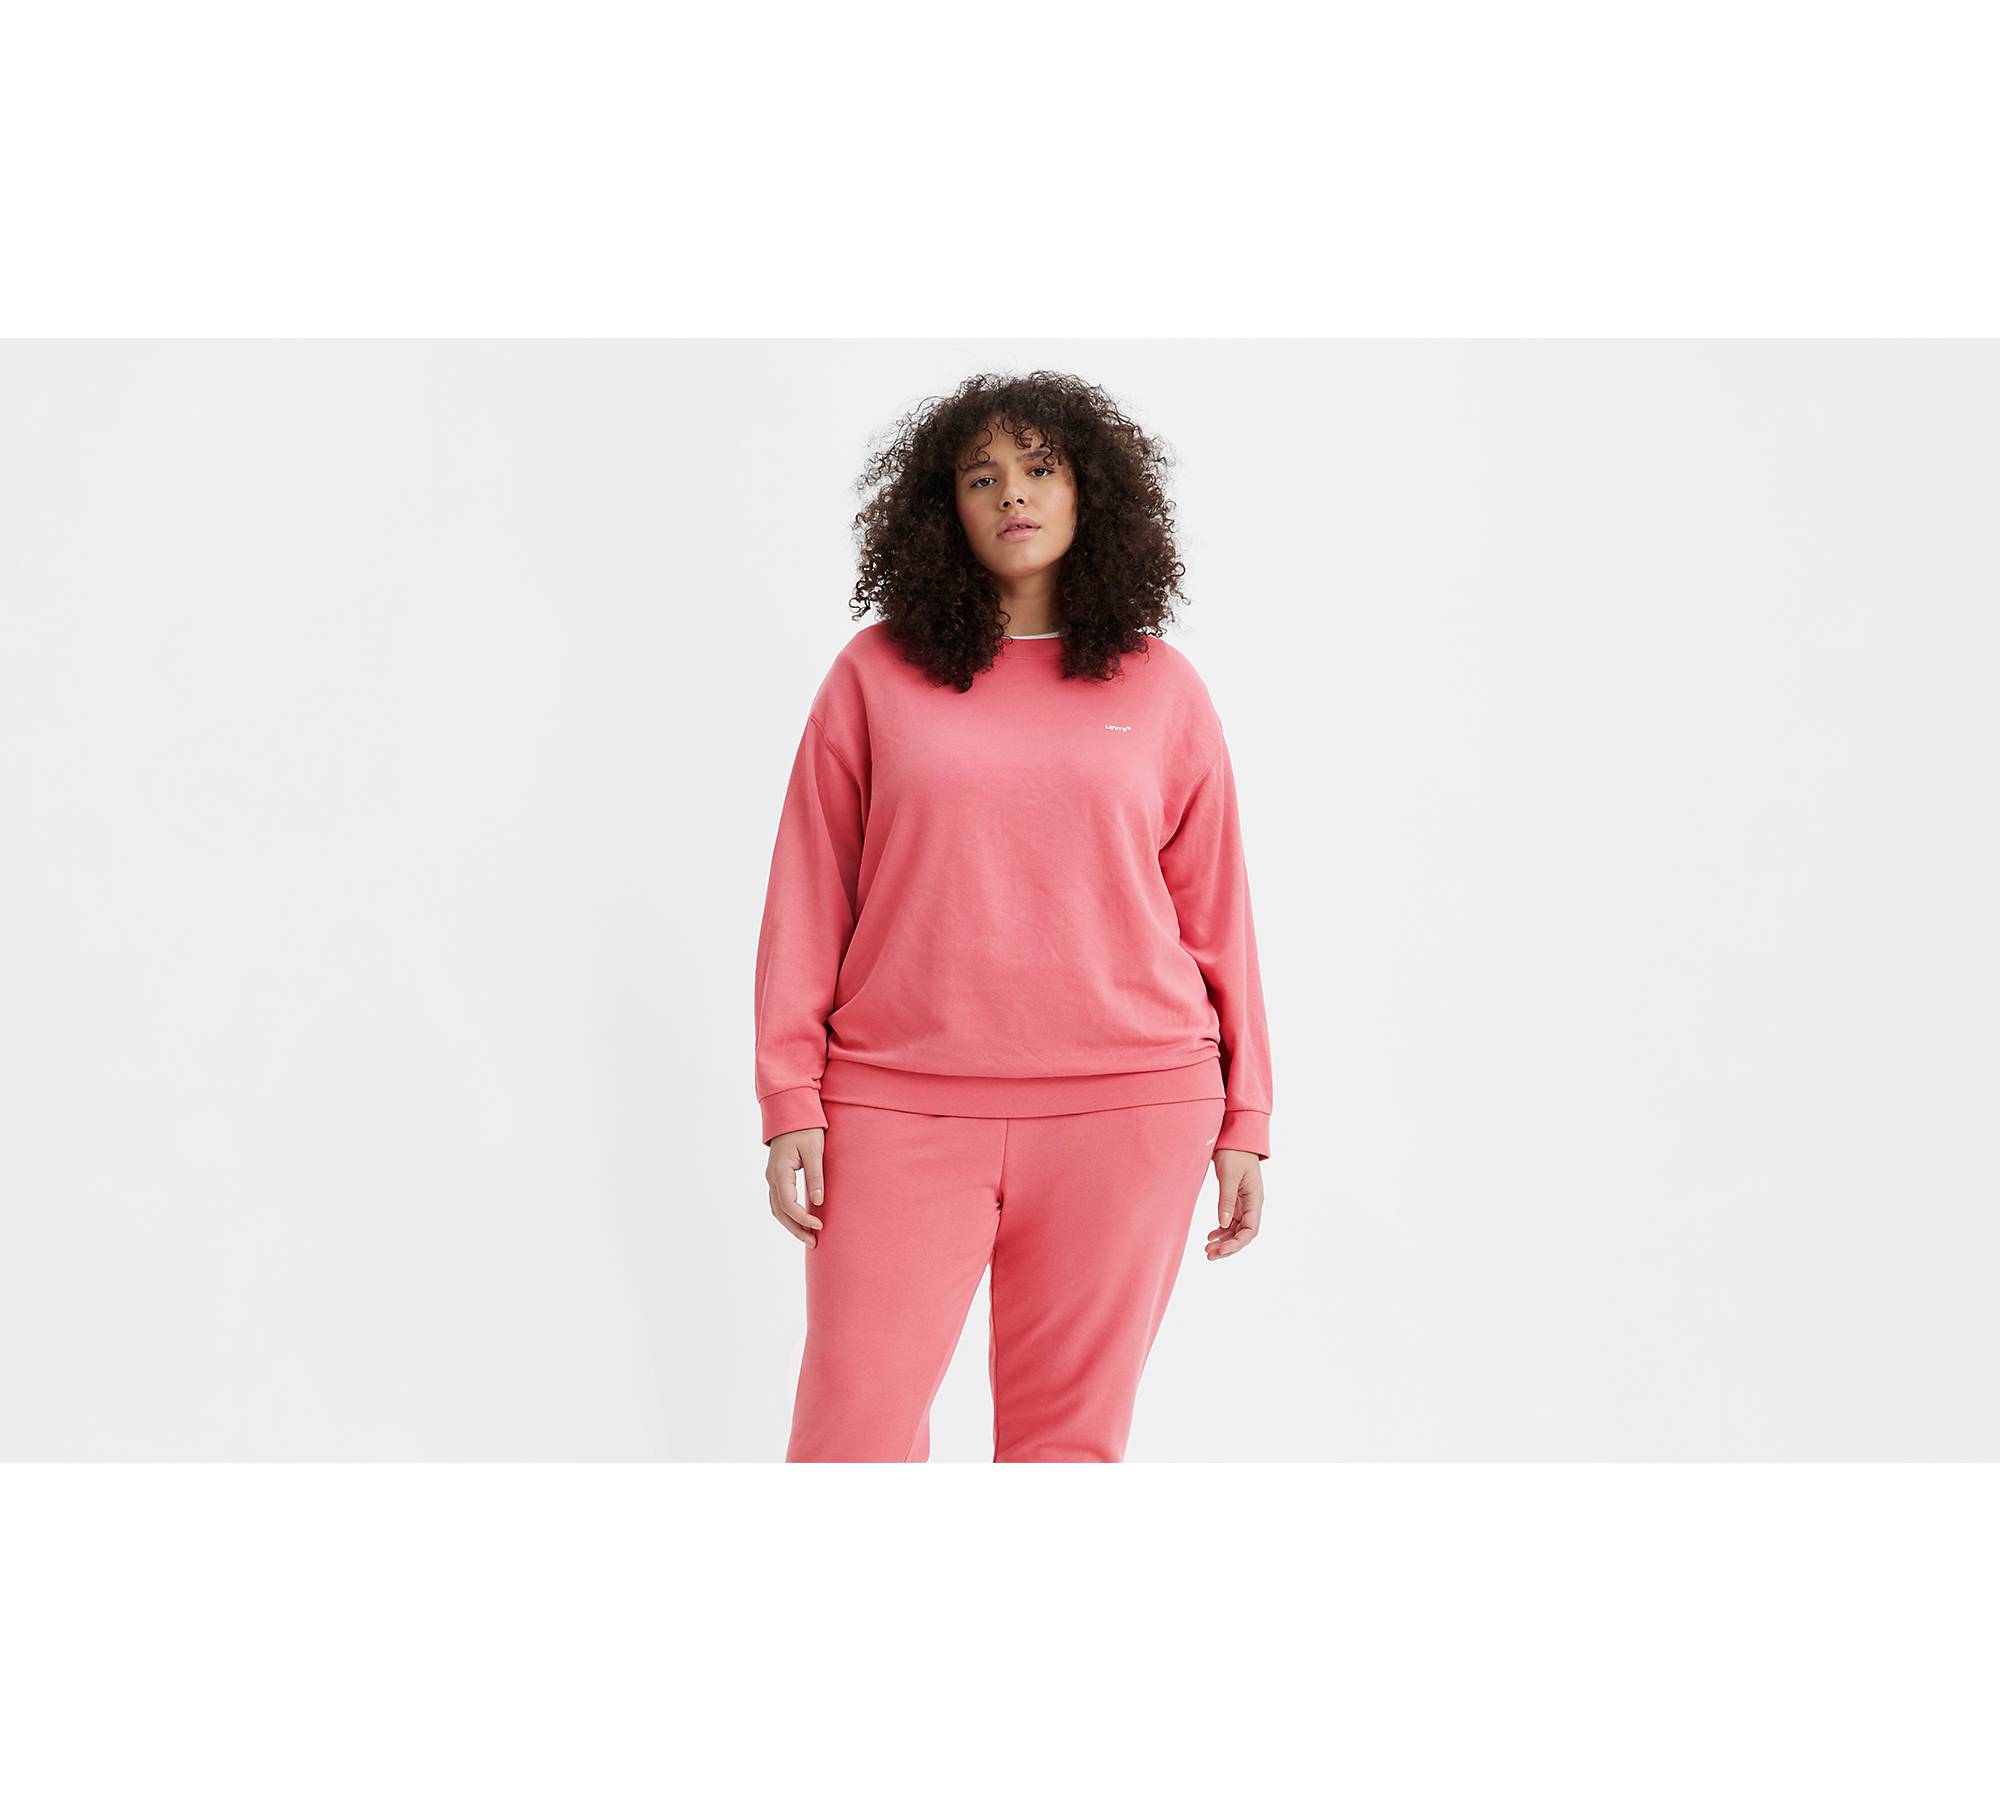 Pink Large Women's Sweatshirts $30 - $40 from All Good Laces